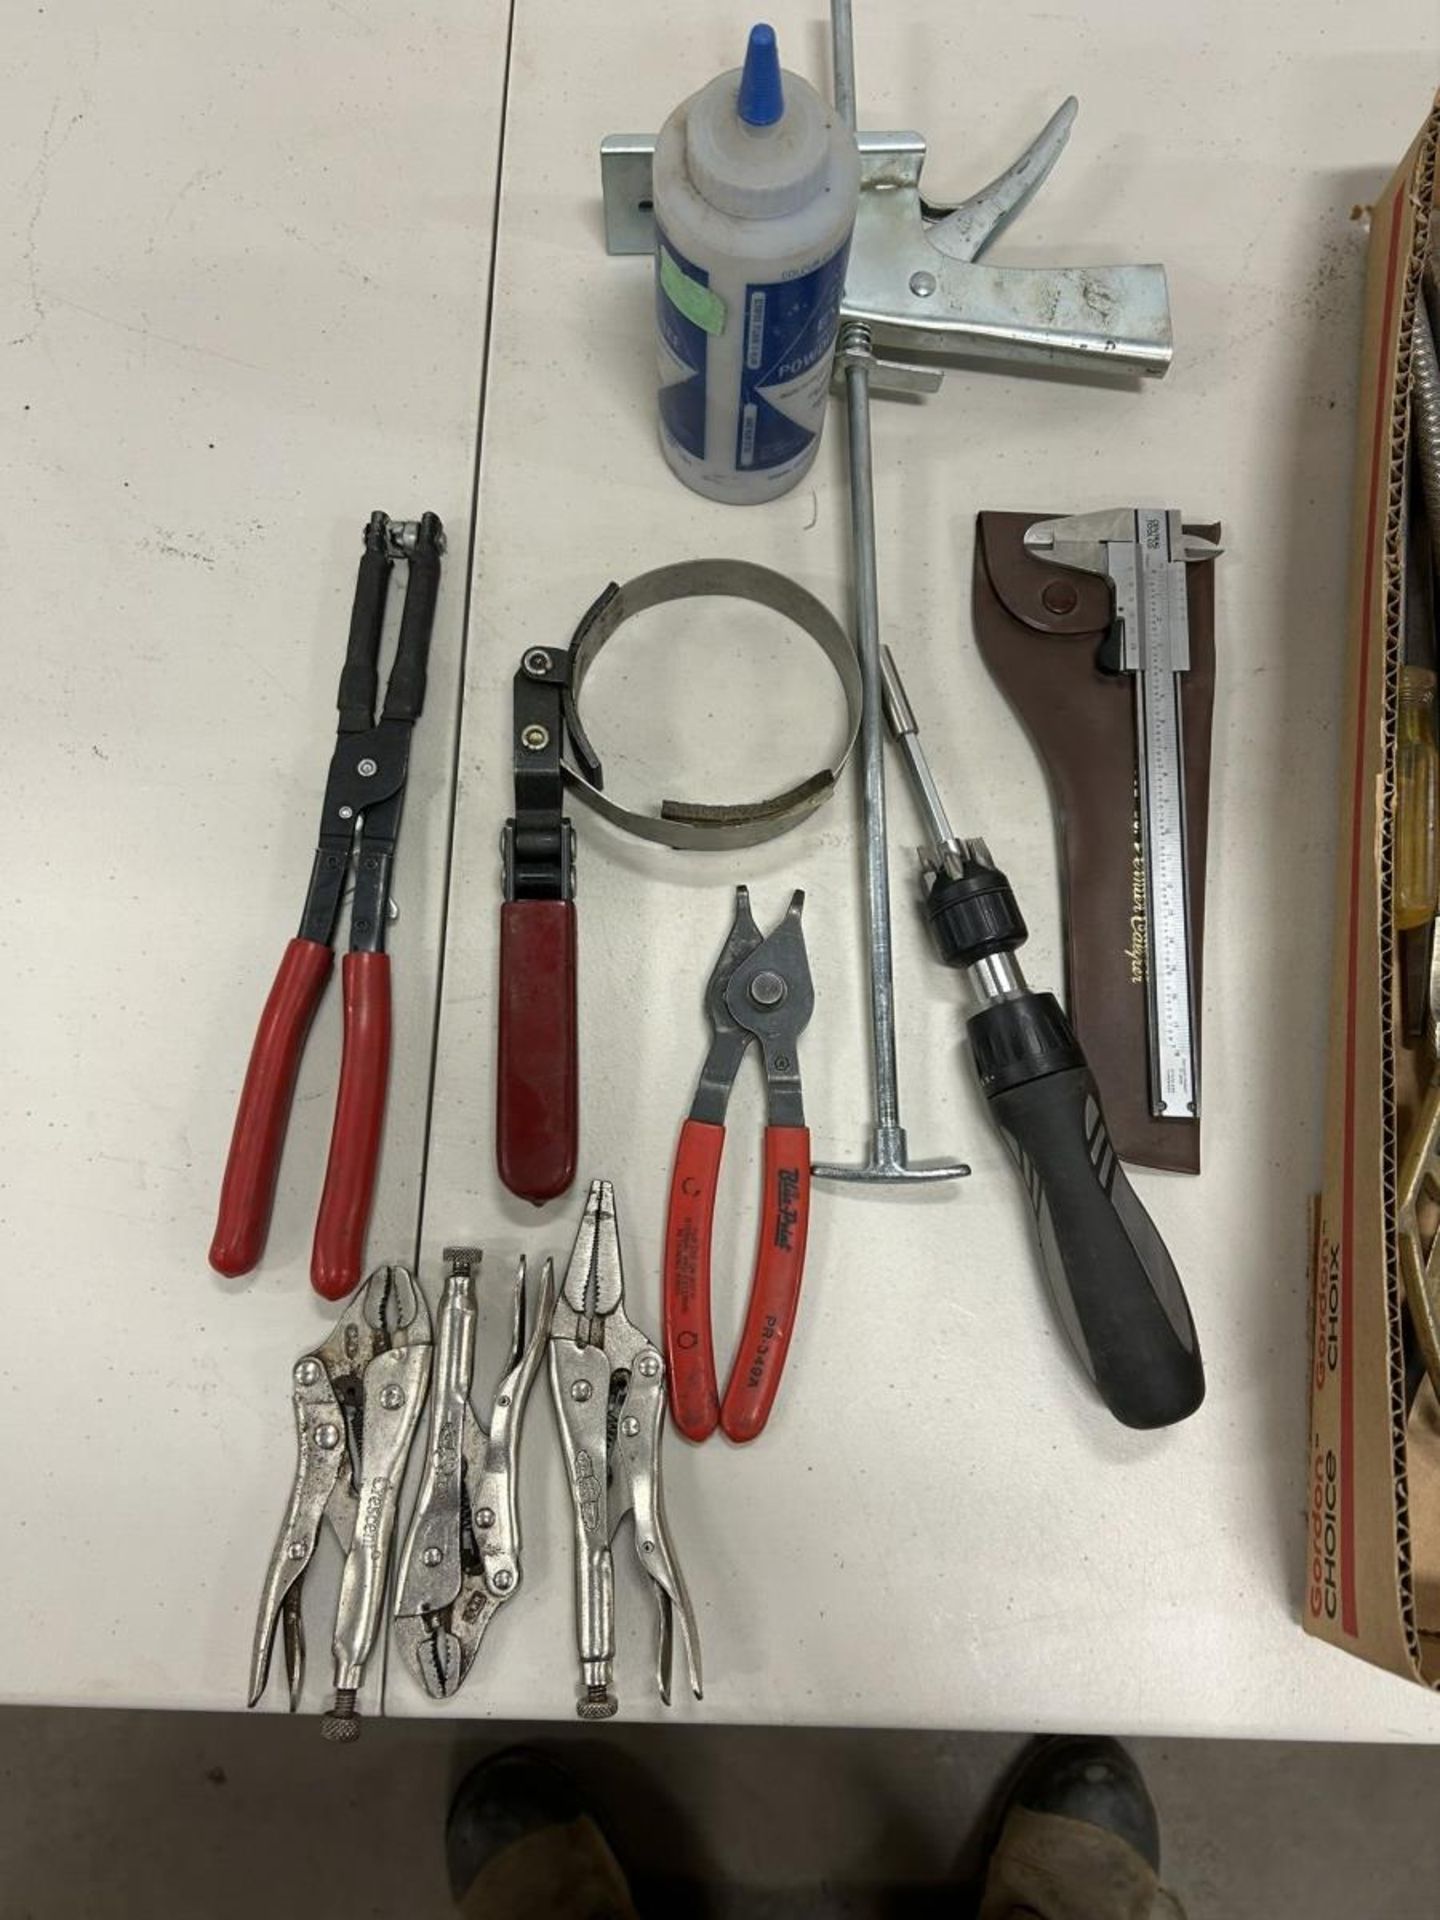 L/O ASSORTED HAND TOOLS PLIERS, VICE GRIPS, BLUE POINT RETAINING RING PLIERS ETC. - Image 3 of 6